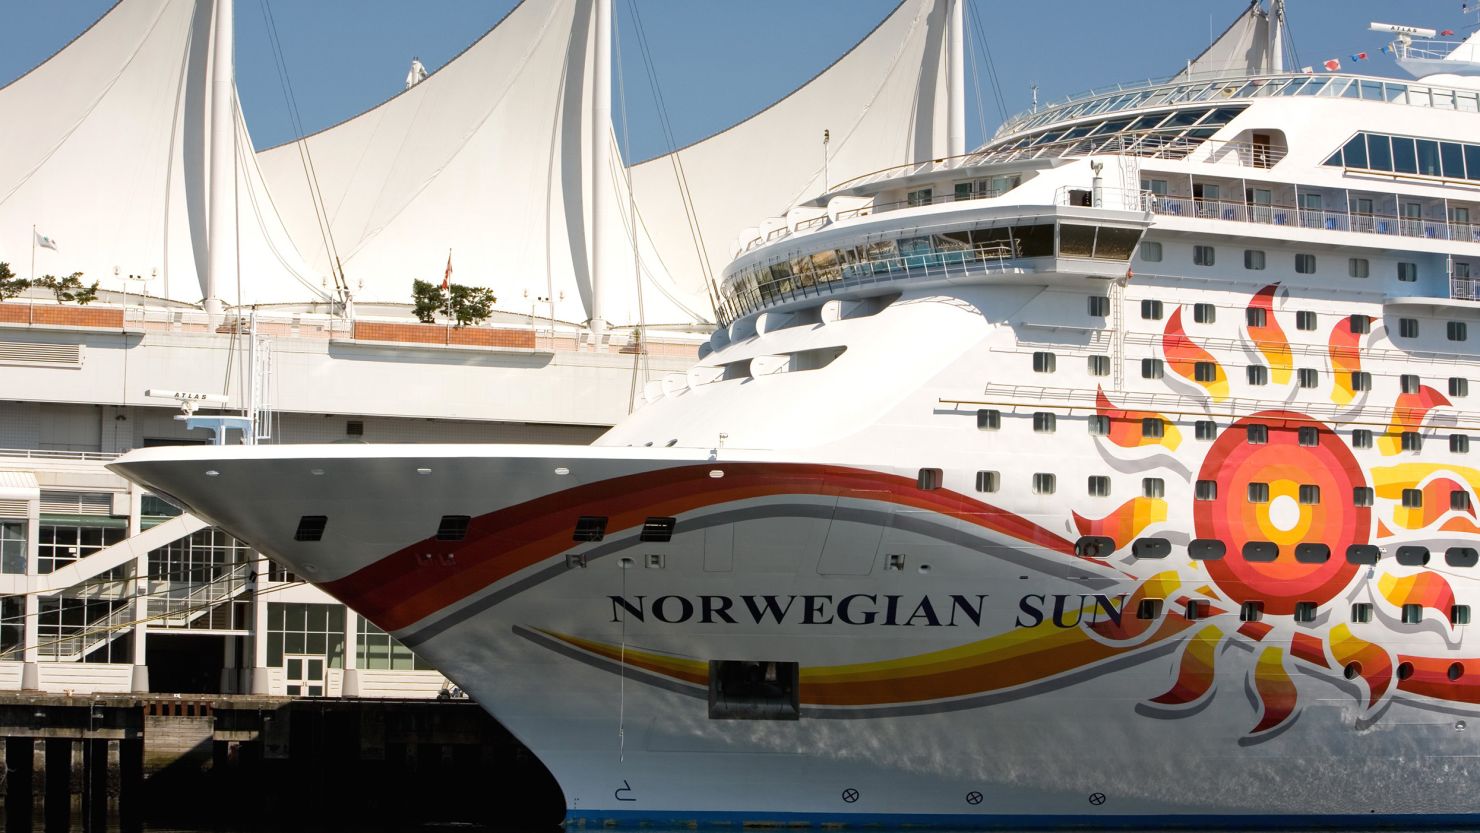 VANCOUVER, BC, CANADA - 2008:  The Norwegian Sun cruise ship is docked at the Seaport in this 2008 Vancouver, British Columbia, Canada, urban landscape photo. This West Coast Canadian city will host the 2010 Winter Olympics. (Photo by George Rose/Getty Images)